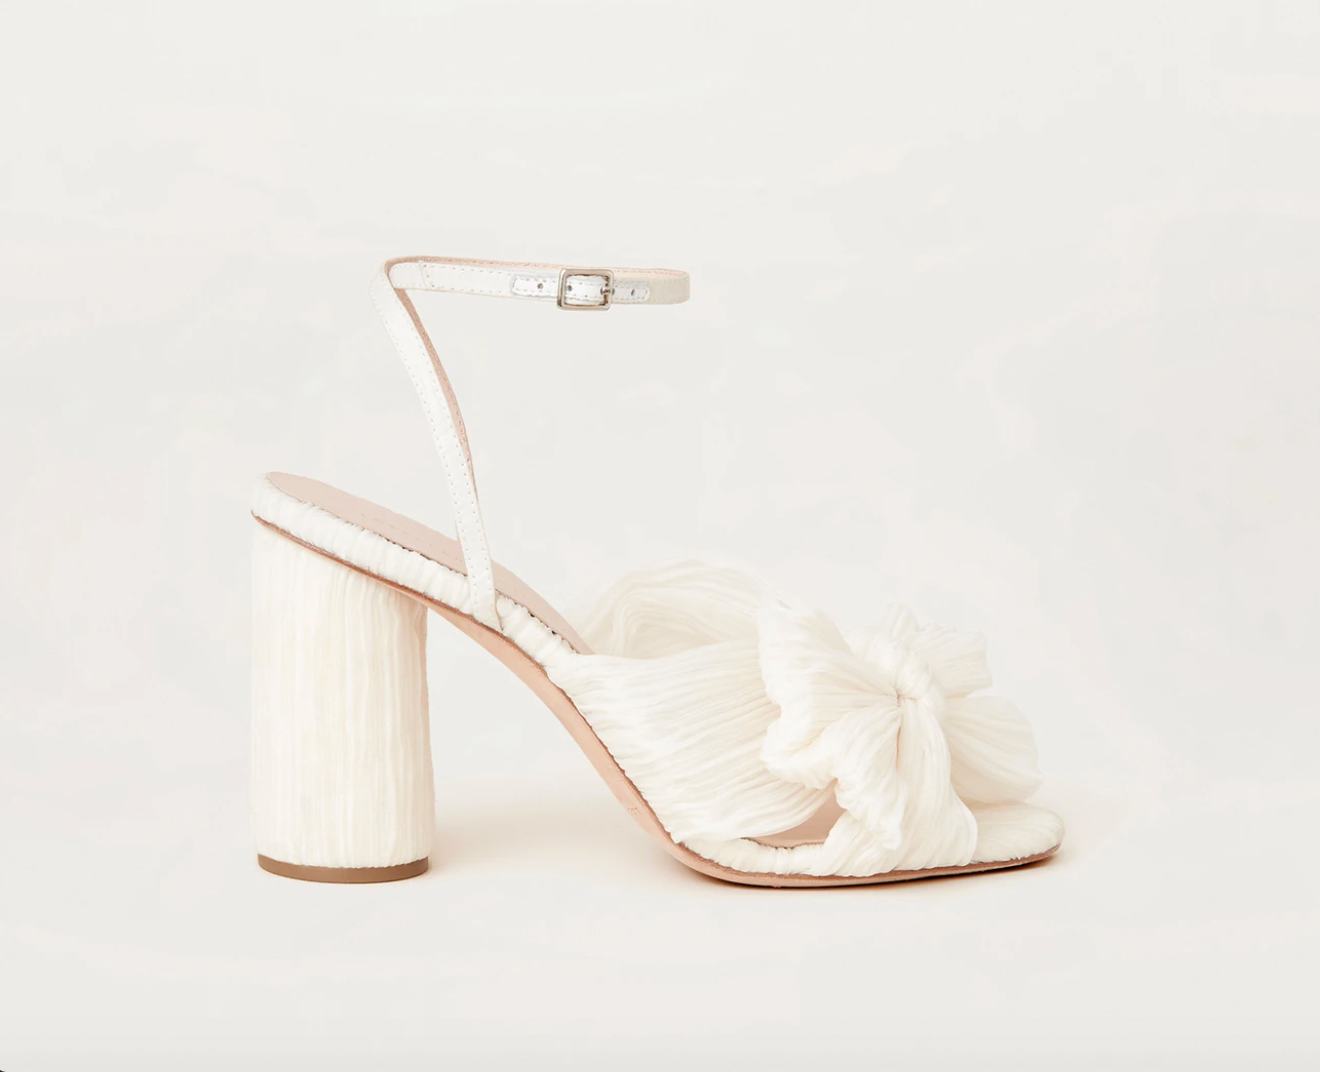 Loeffler Randall Camellia Bow Heel with Ankle Strap in Pearl